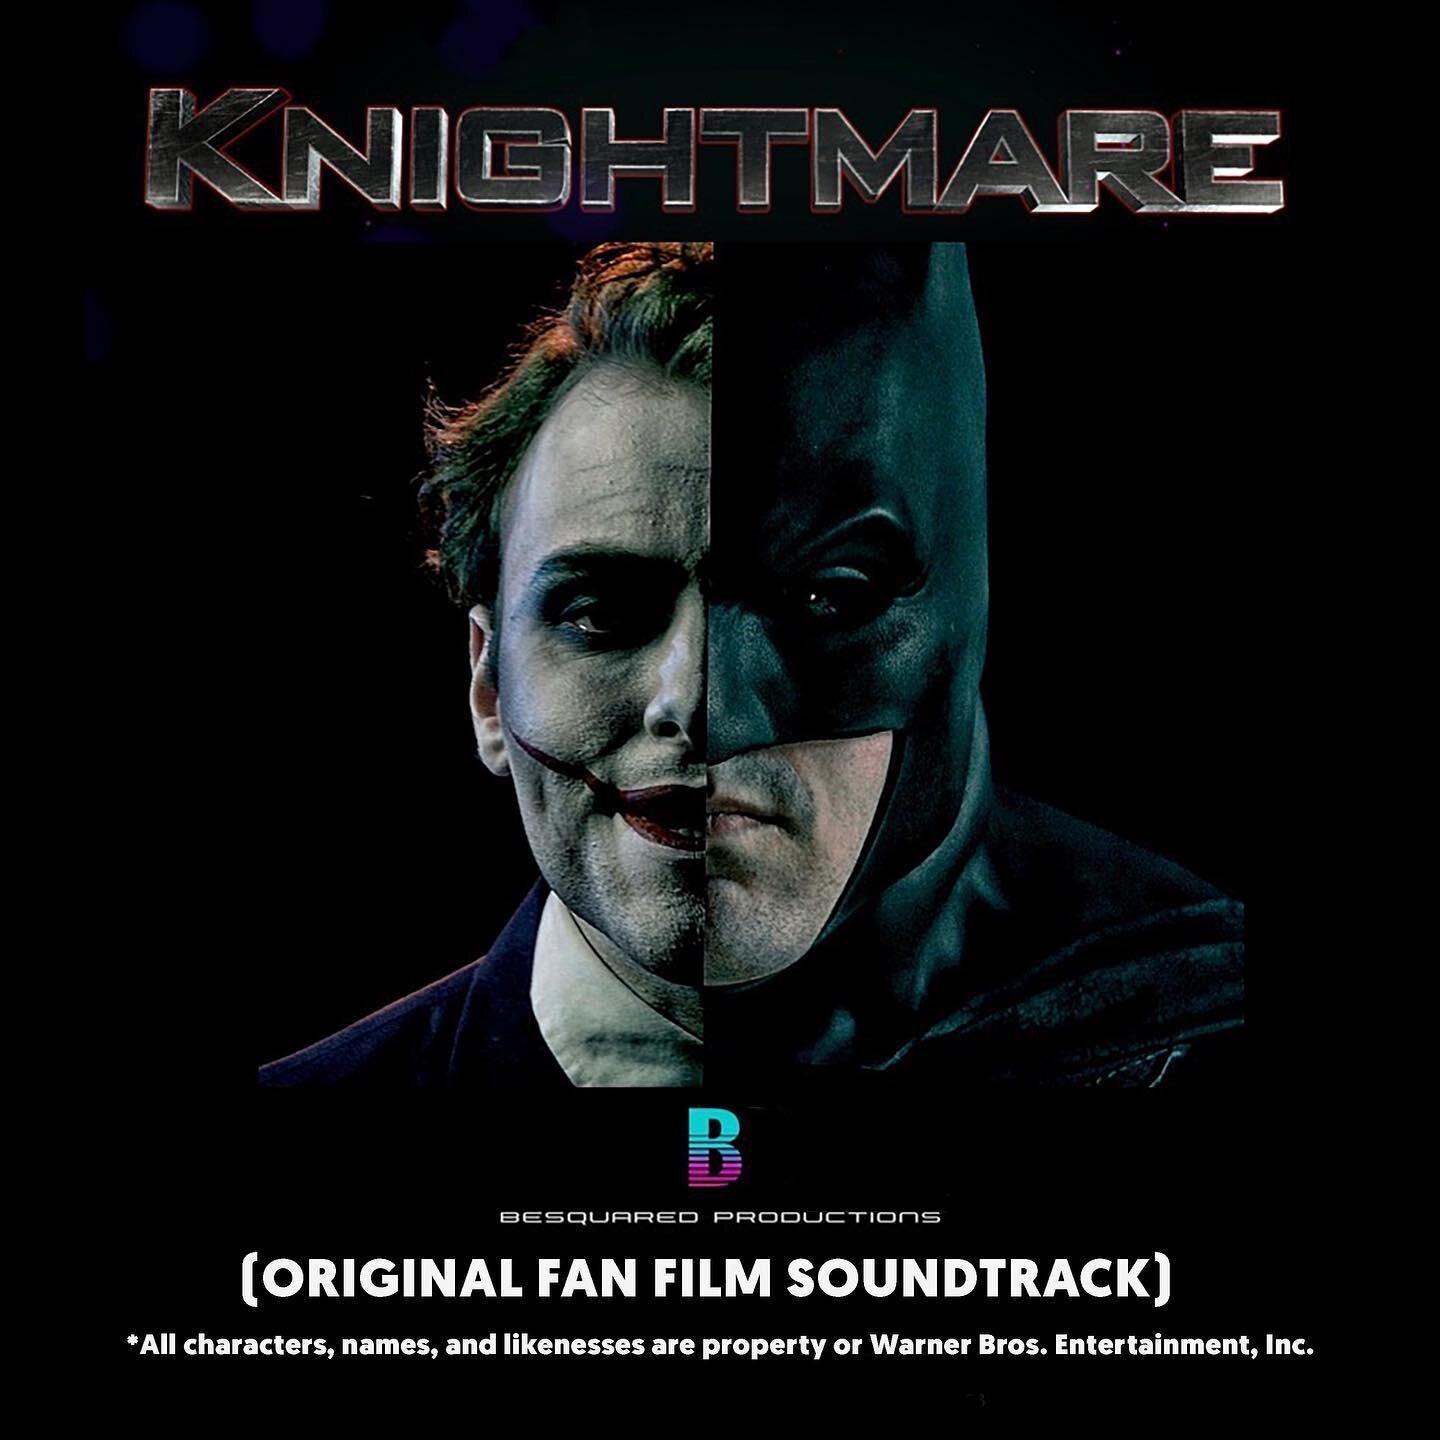 You can stream/download my soundtracks to both @besquaredproductions Batman fan films KNIGHTMARE and The Death of Robin on Spotify and Apple Music at 12pm (in your time zone) on July 16th! #linkinbio to save the album on Spotify!